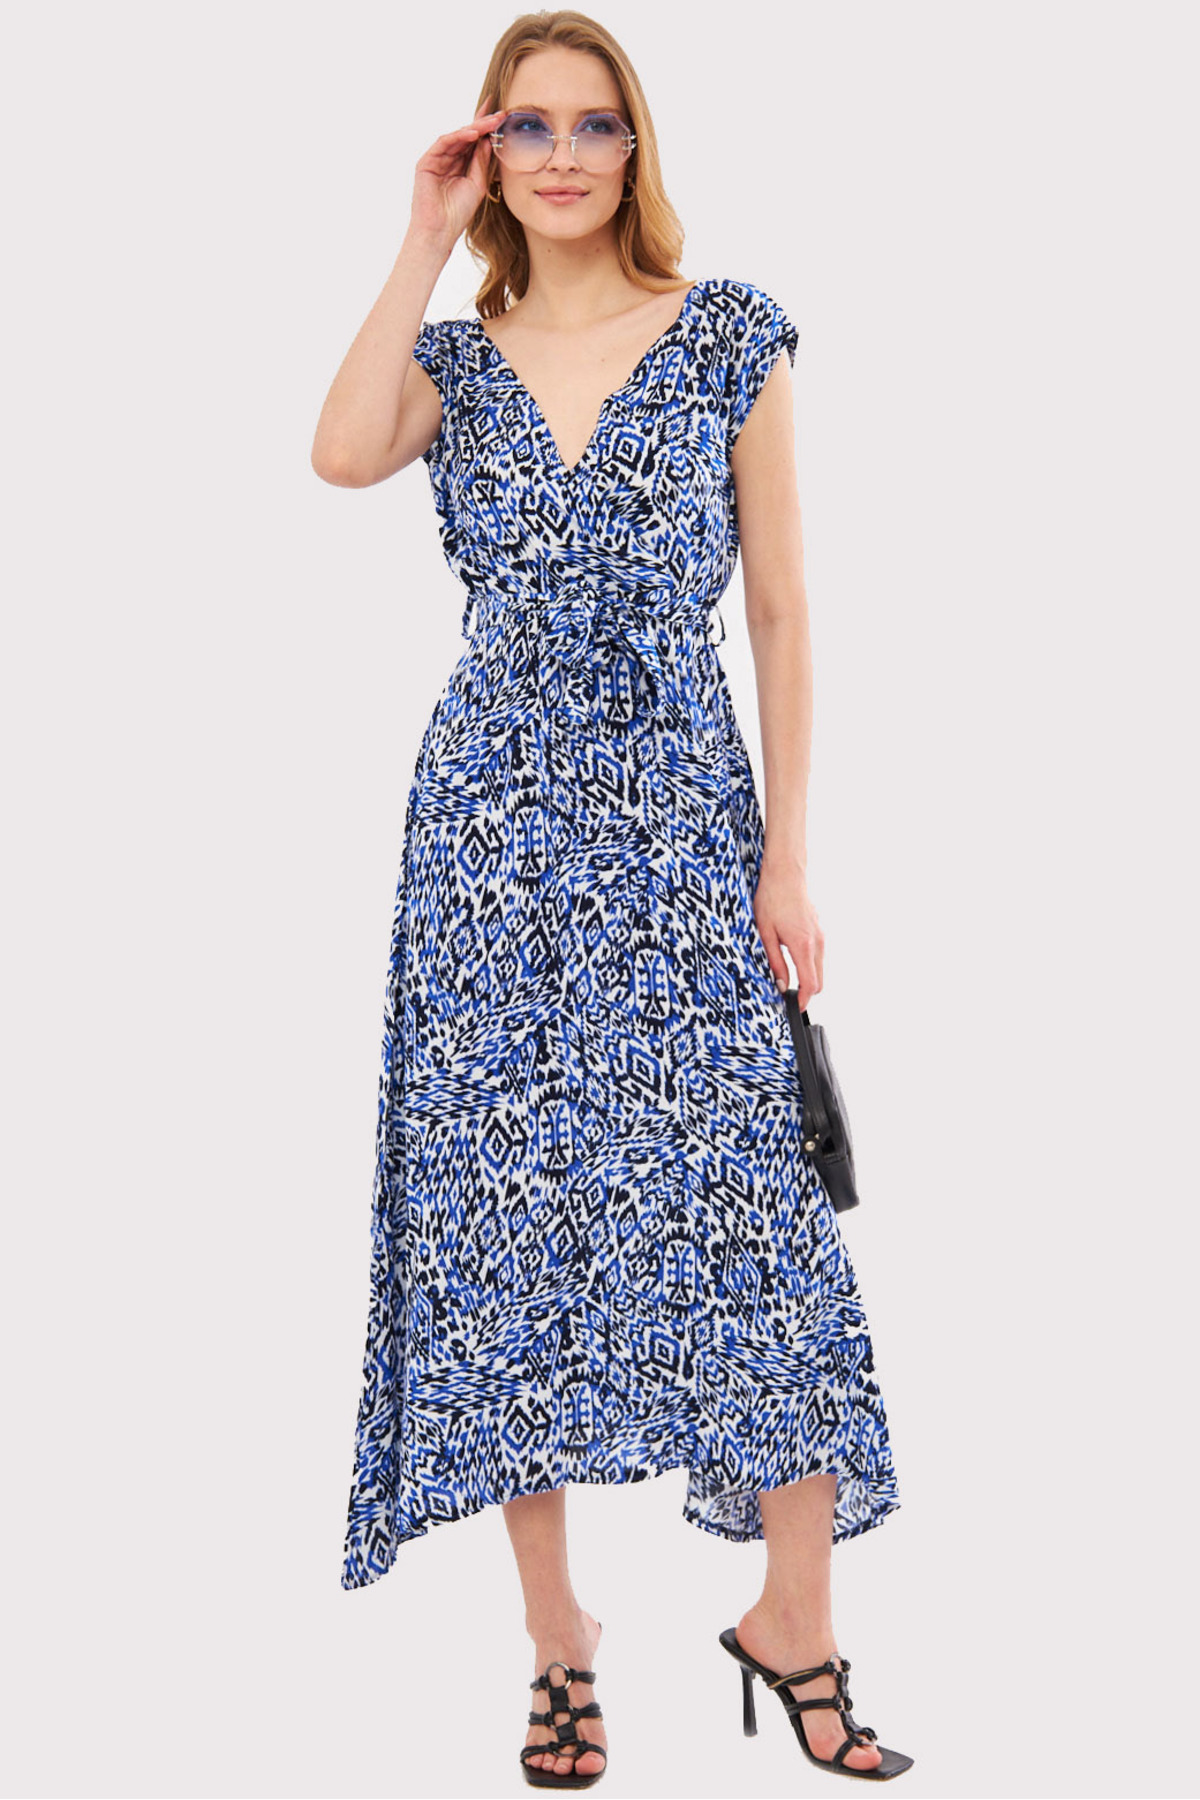 armonika Women's Saks Efta Dress Back And Front Side Double Breasted Belted Patterned Midi Length